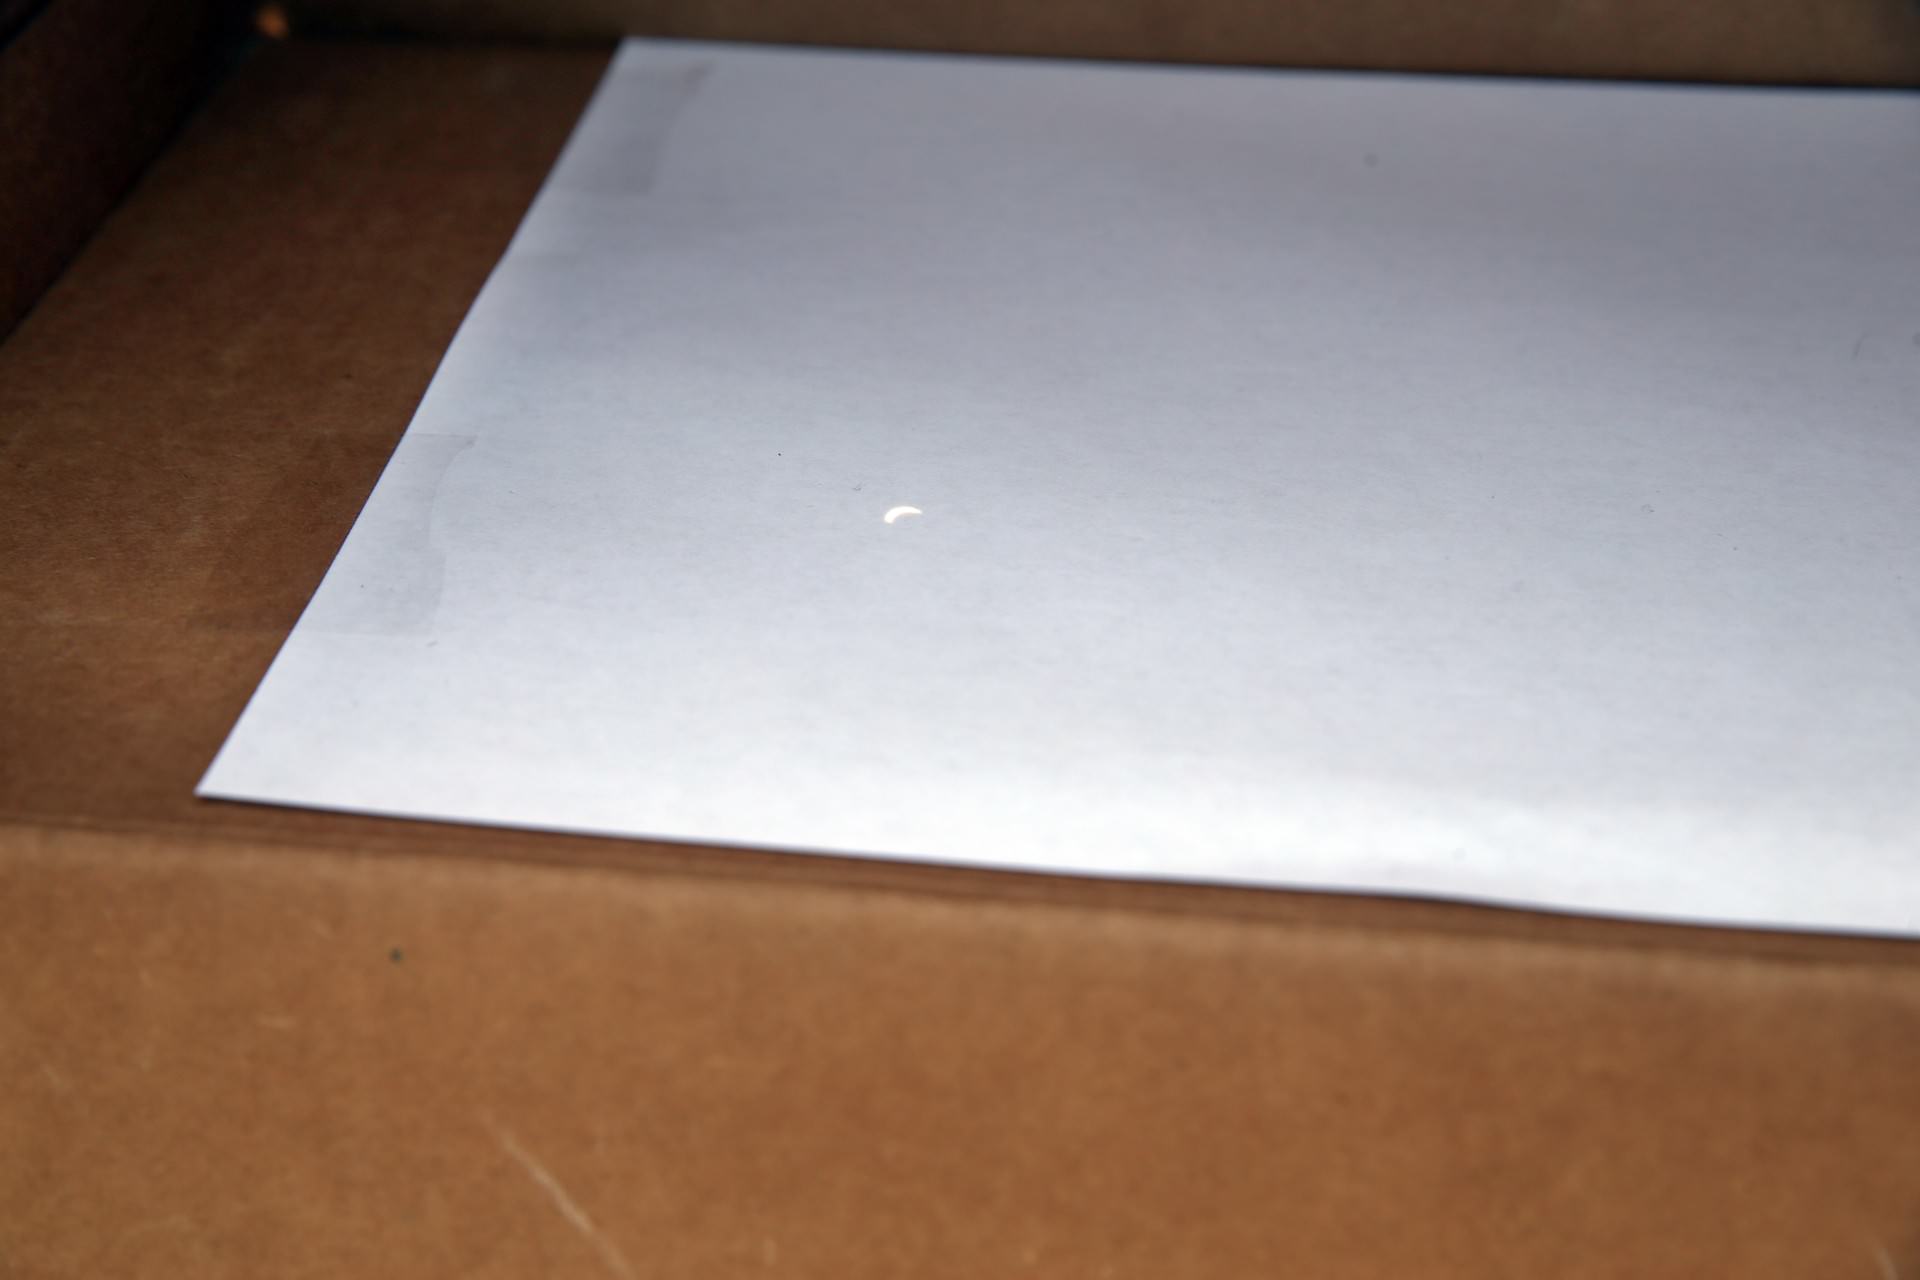 Solar eclipse cresent shining on white paper